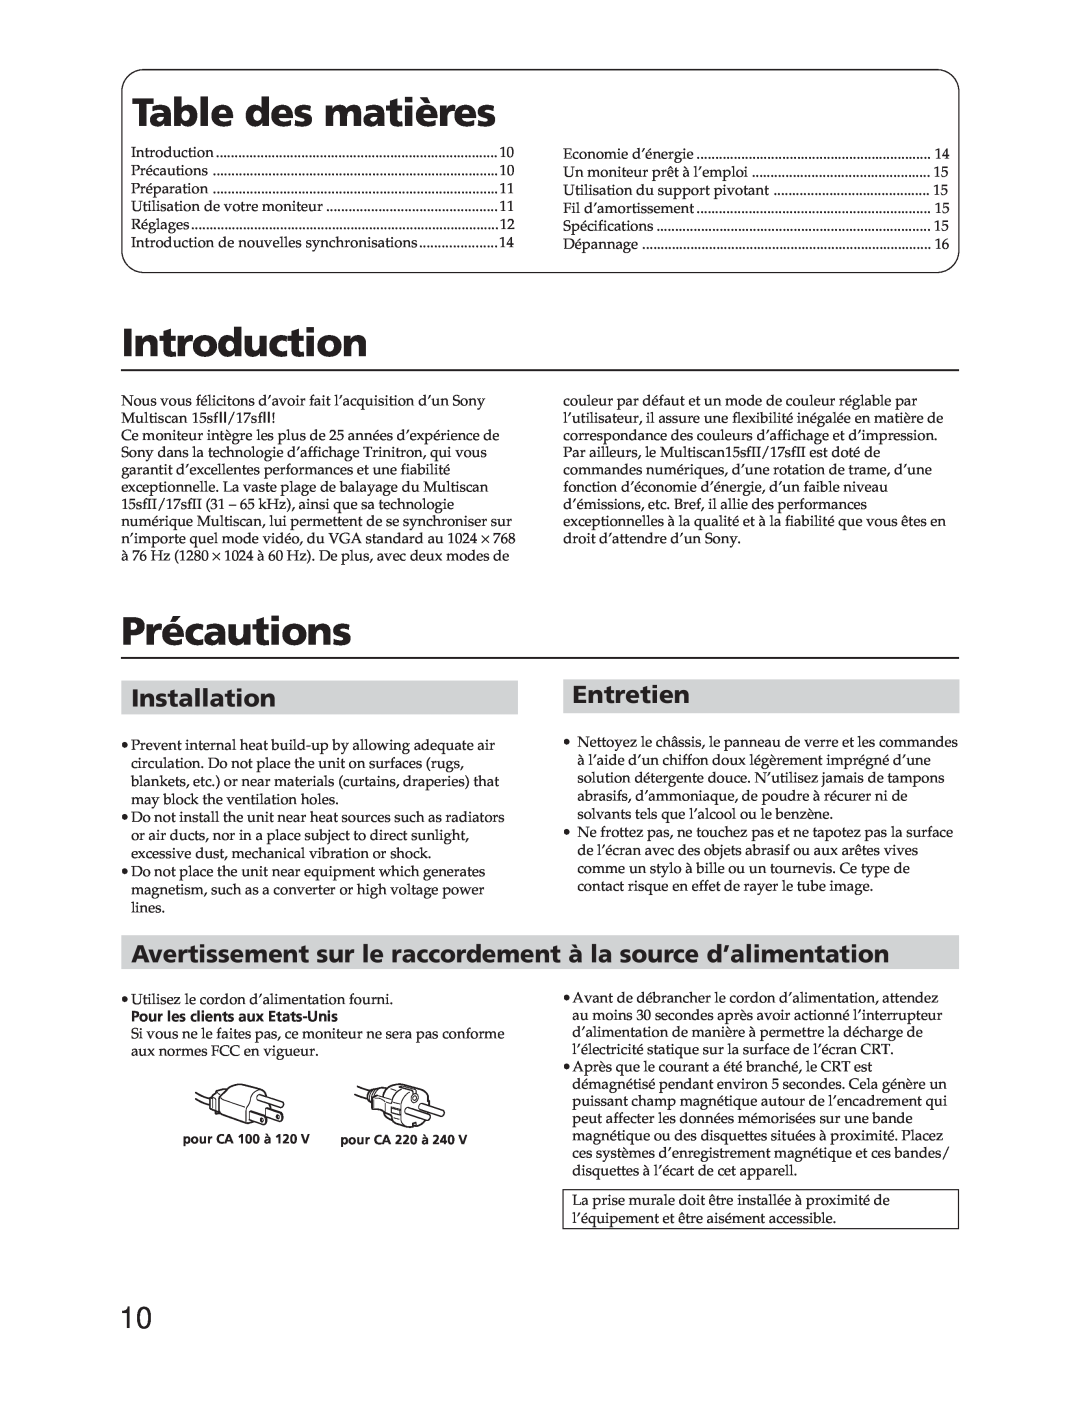 Sony CPD-17SF2, CPD-15SF2 manual Table des matières, Précautions, InstallationEntretien, Introduction 